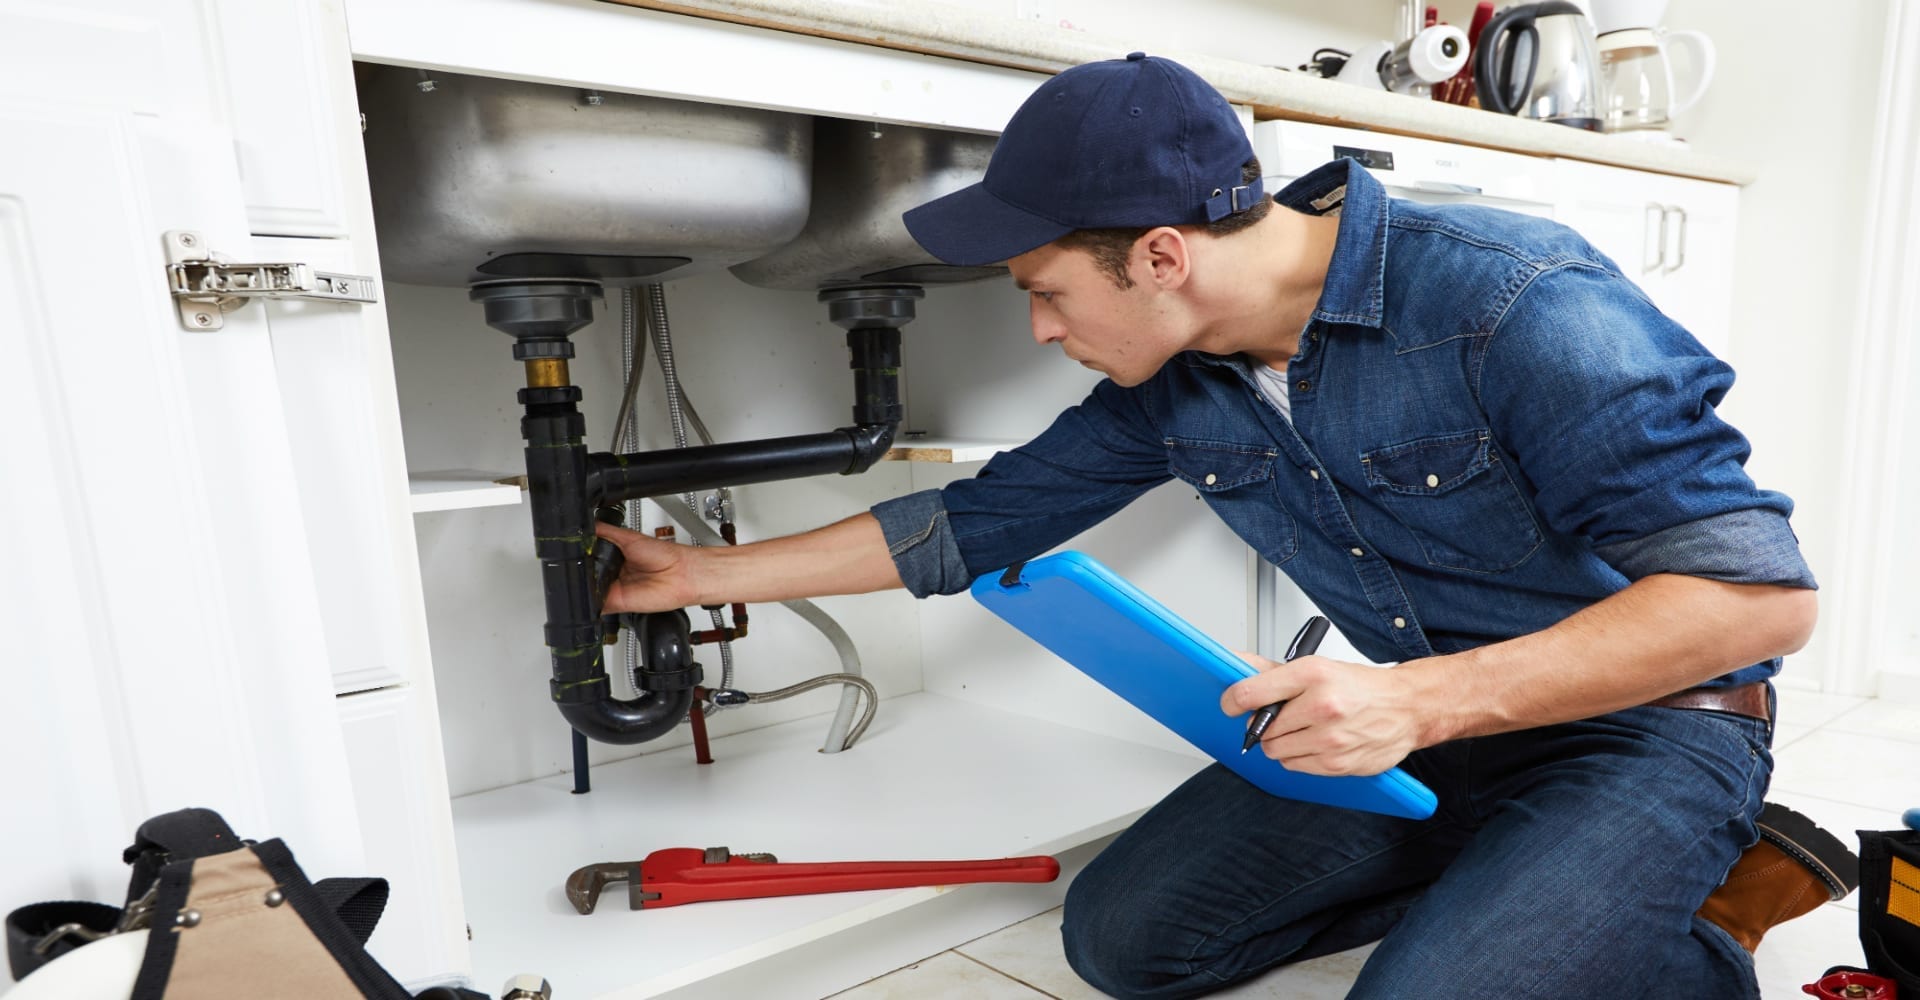  hire professional Plumber in Newcastle